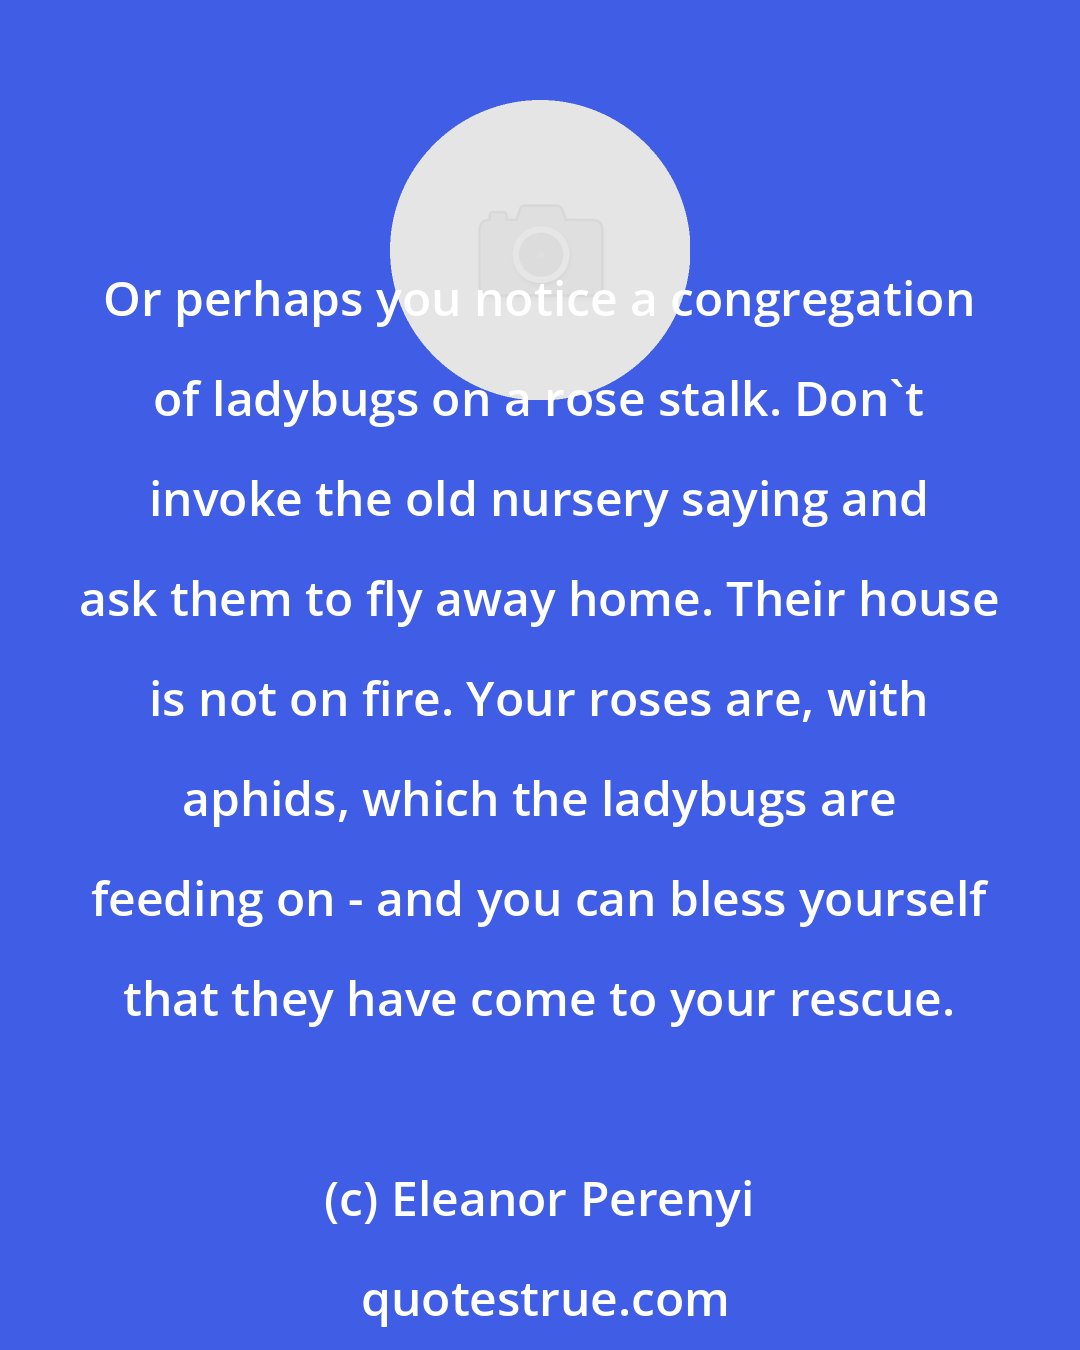 Eleanor Perenyi: Or perhaps you notice a congregation of ladybugs on a rose stalk. Don't invoke the old nursery saying and ask them to fly away home. Their house is not on fire. Your roses are, with aphids, which the ladybugs are feeding on - and you can bless yourself that they have come to your rescue.